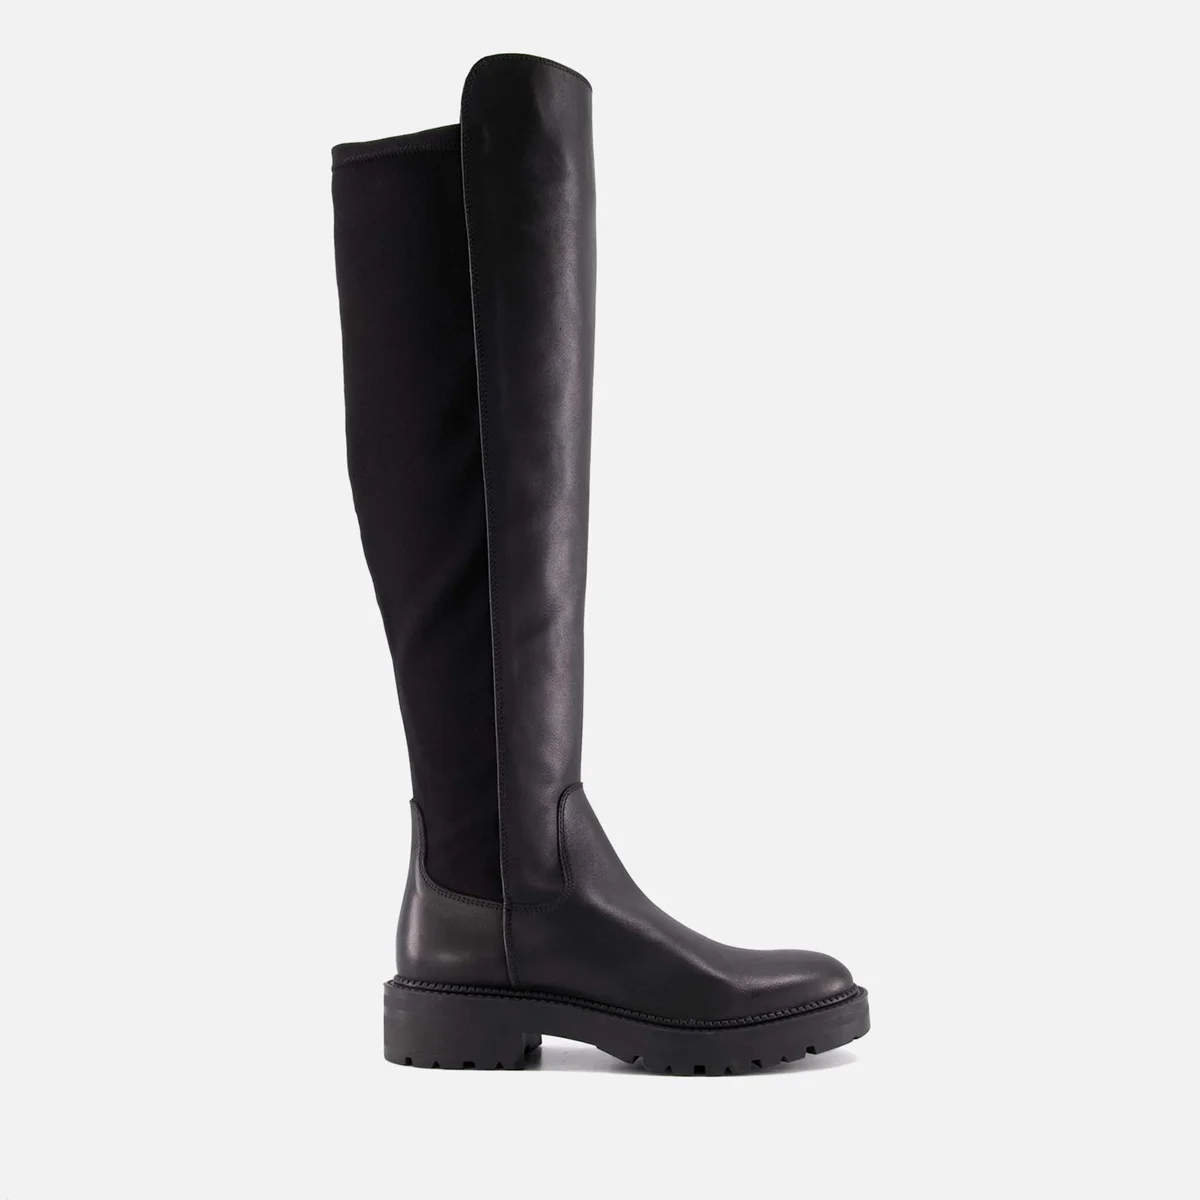 Dune Women's Tella Leather Knee-High Boots Image 1